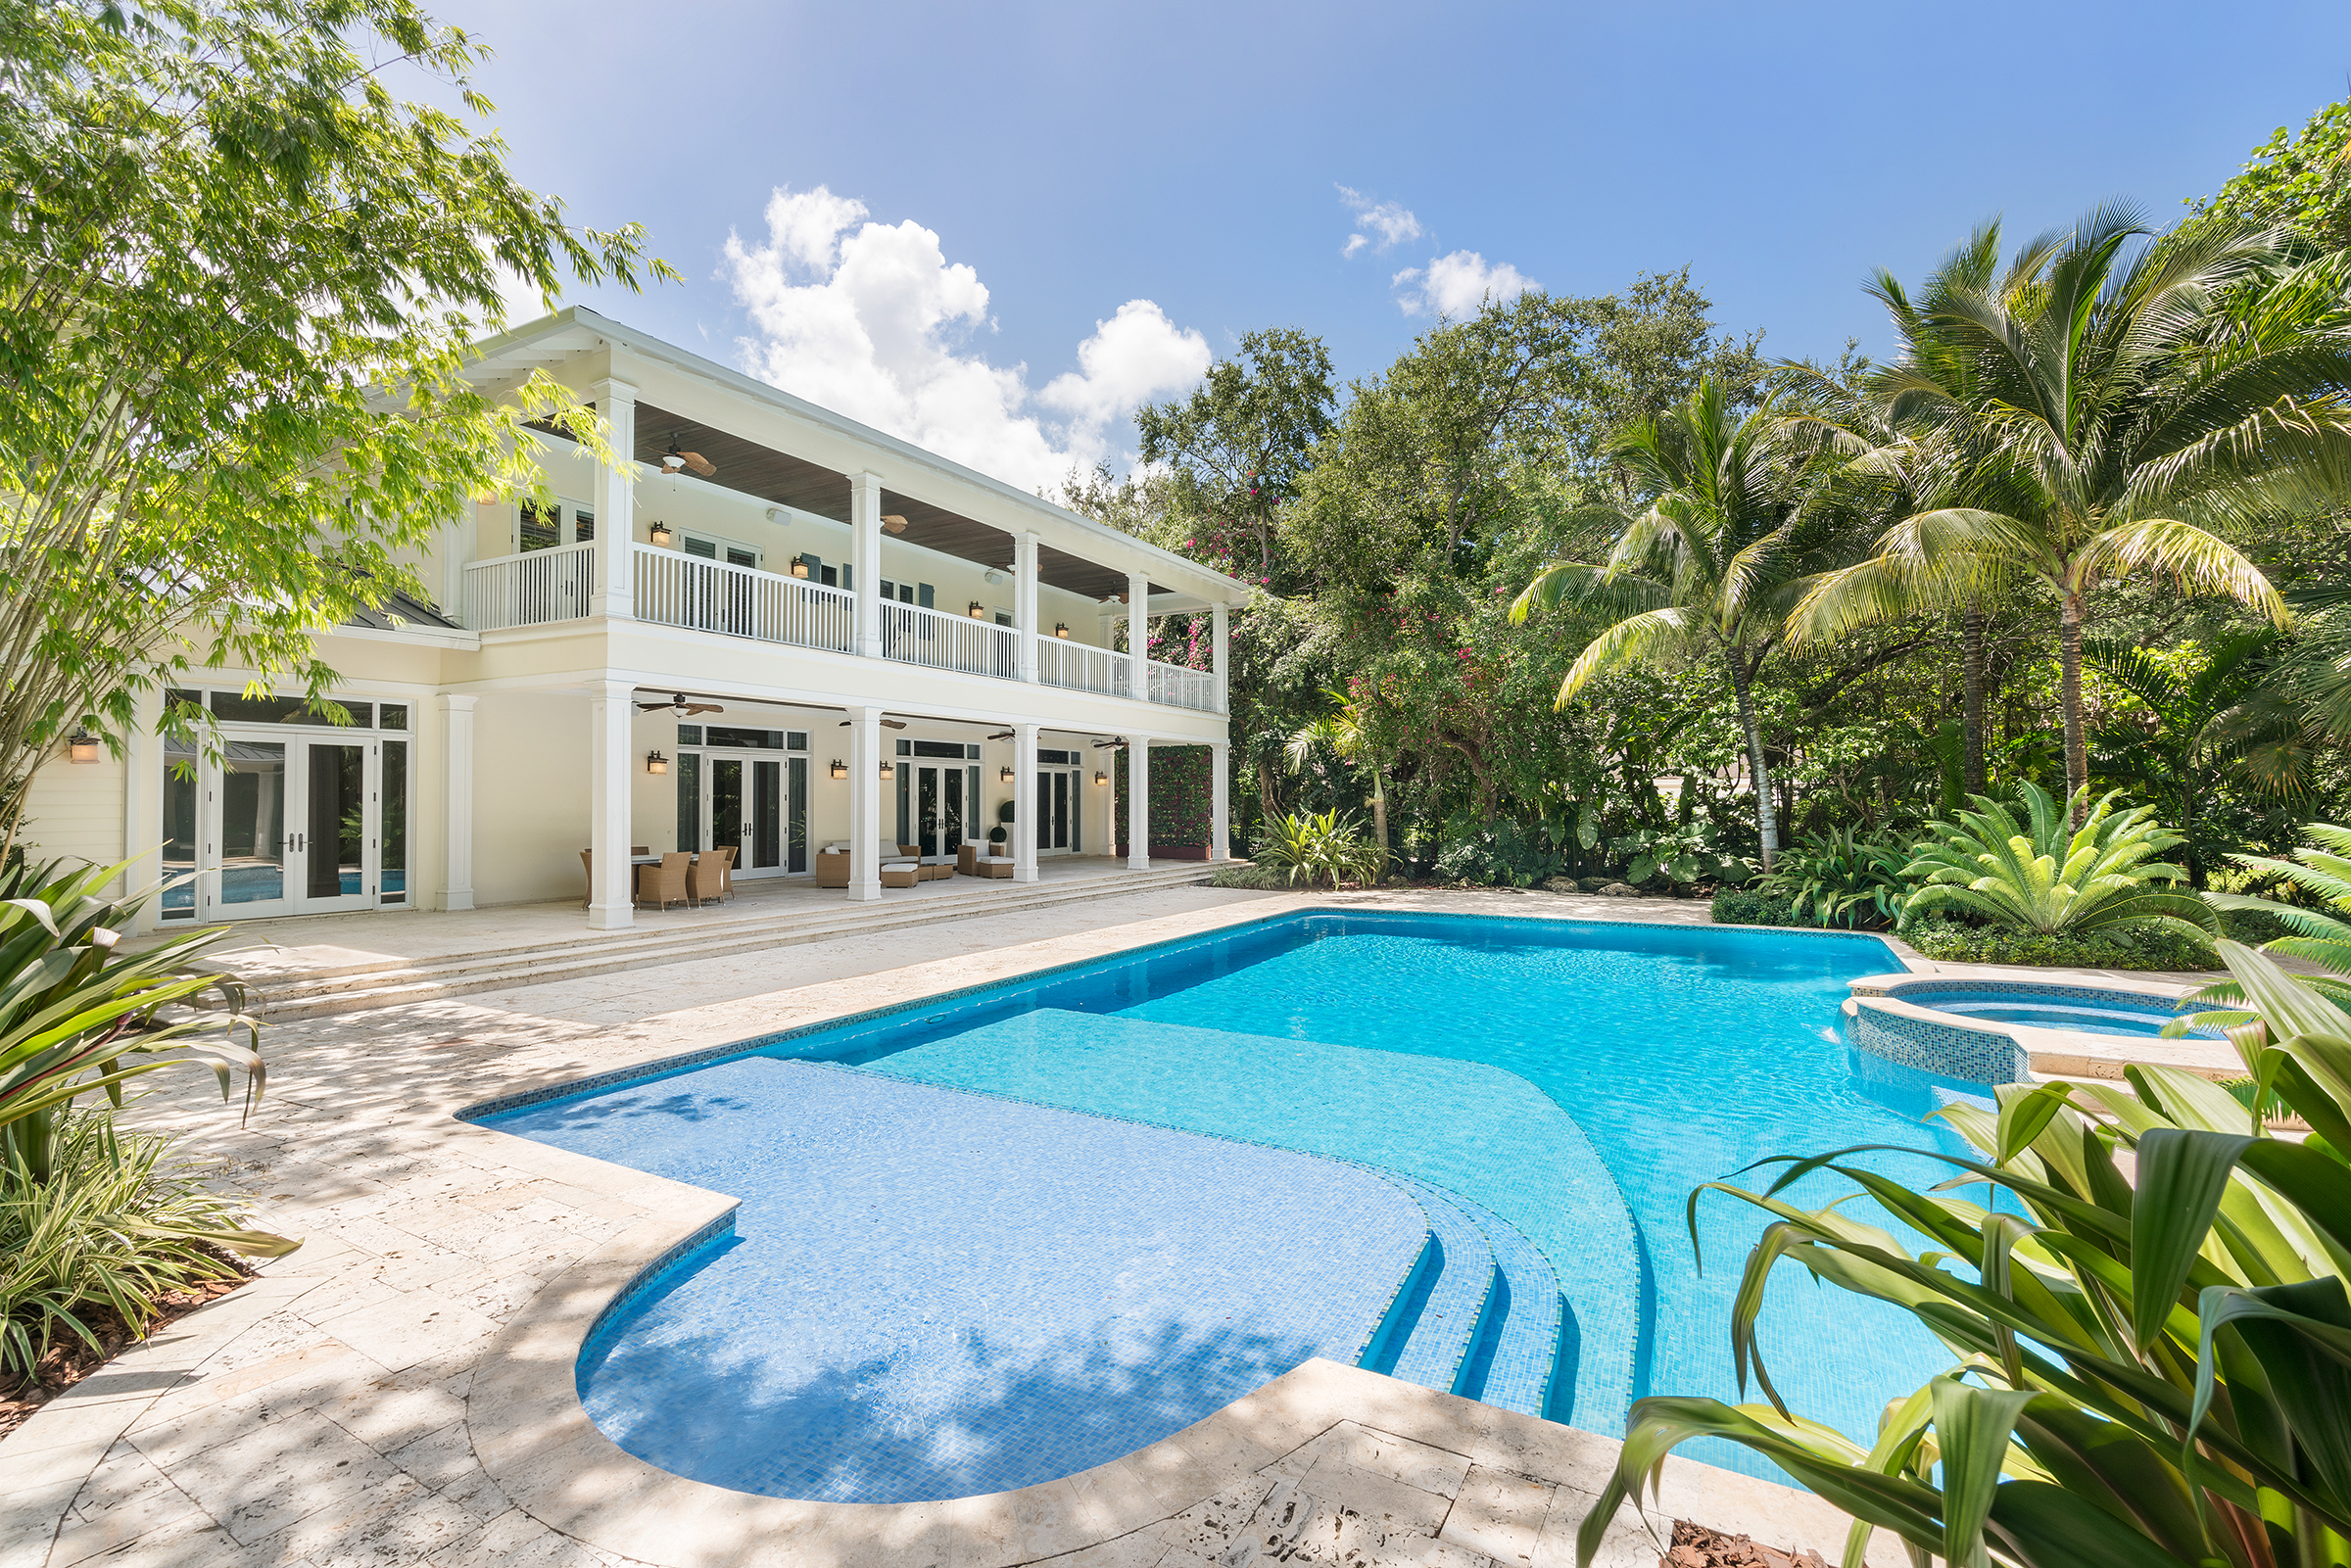 Magnificent Villa on an Acre of land in the Heart of Miami/Ponce Davis Area